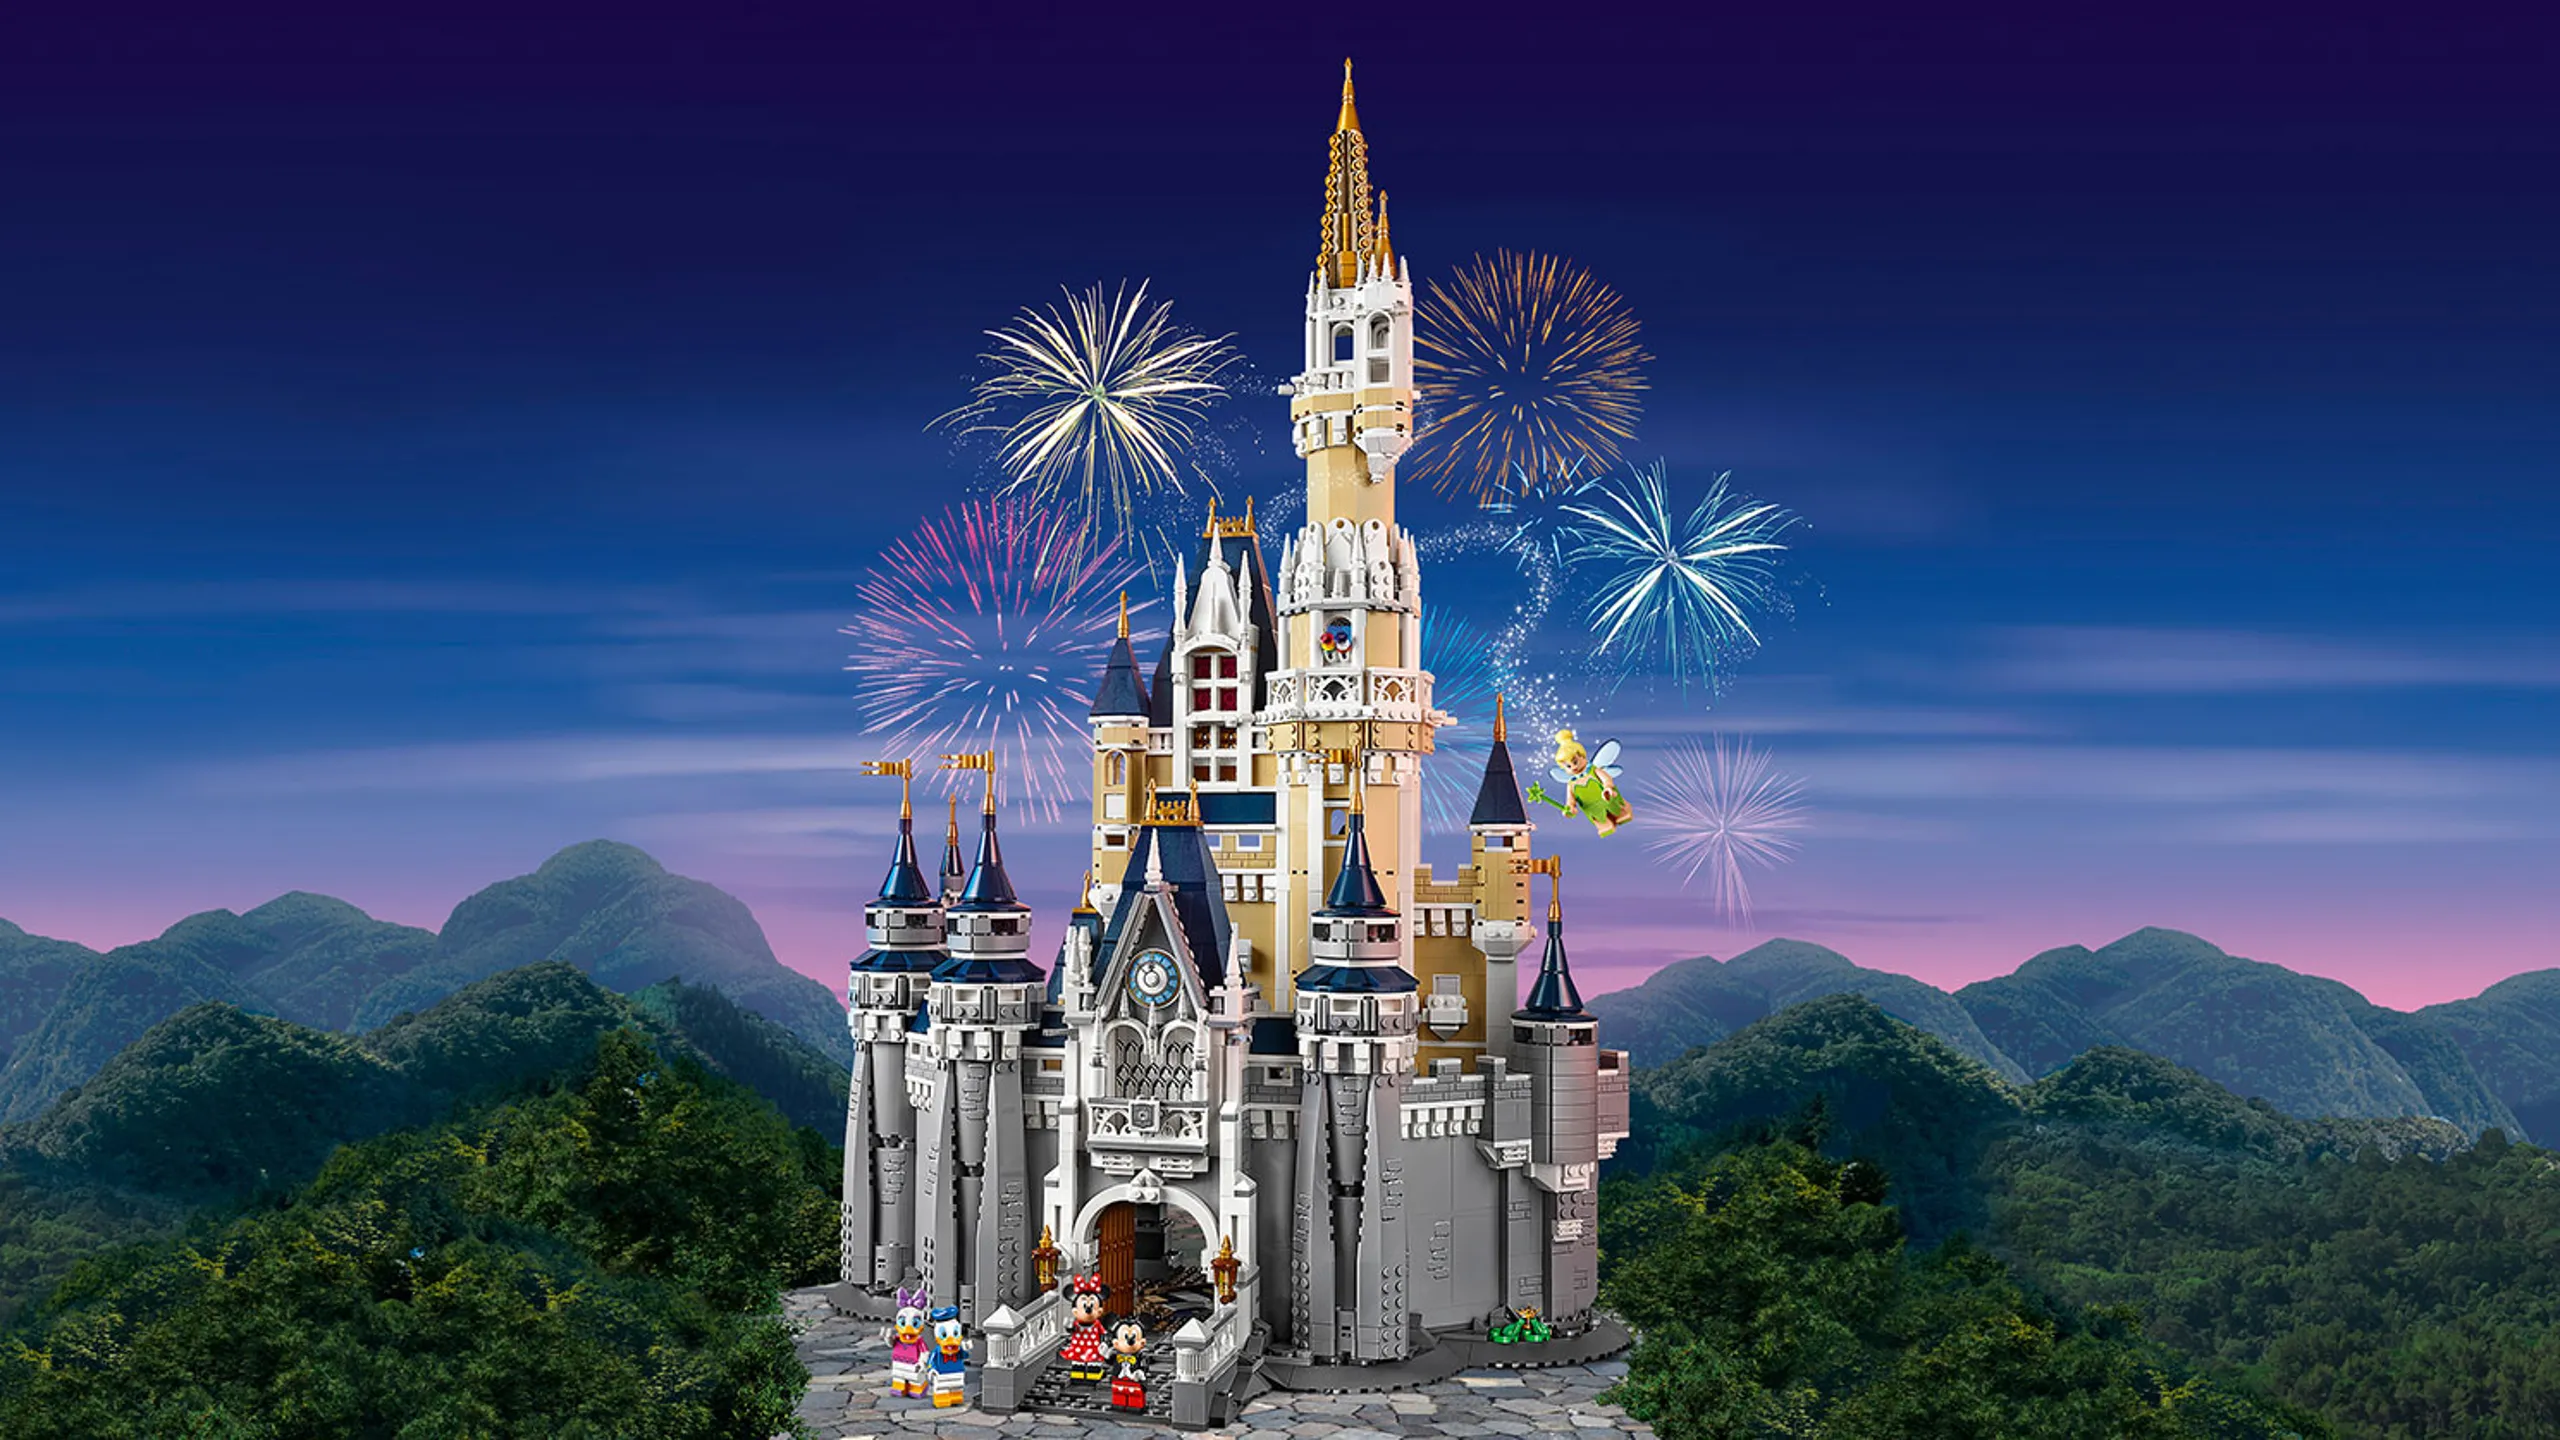 LEGO Disney - 71040 The Disney Castle - Build the legendary Disney Castle with all the towers and spires.